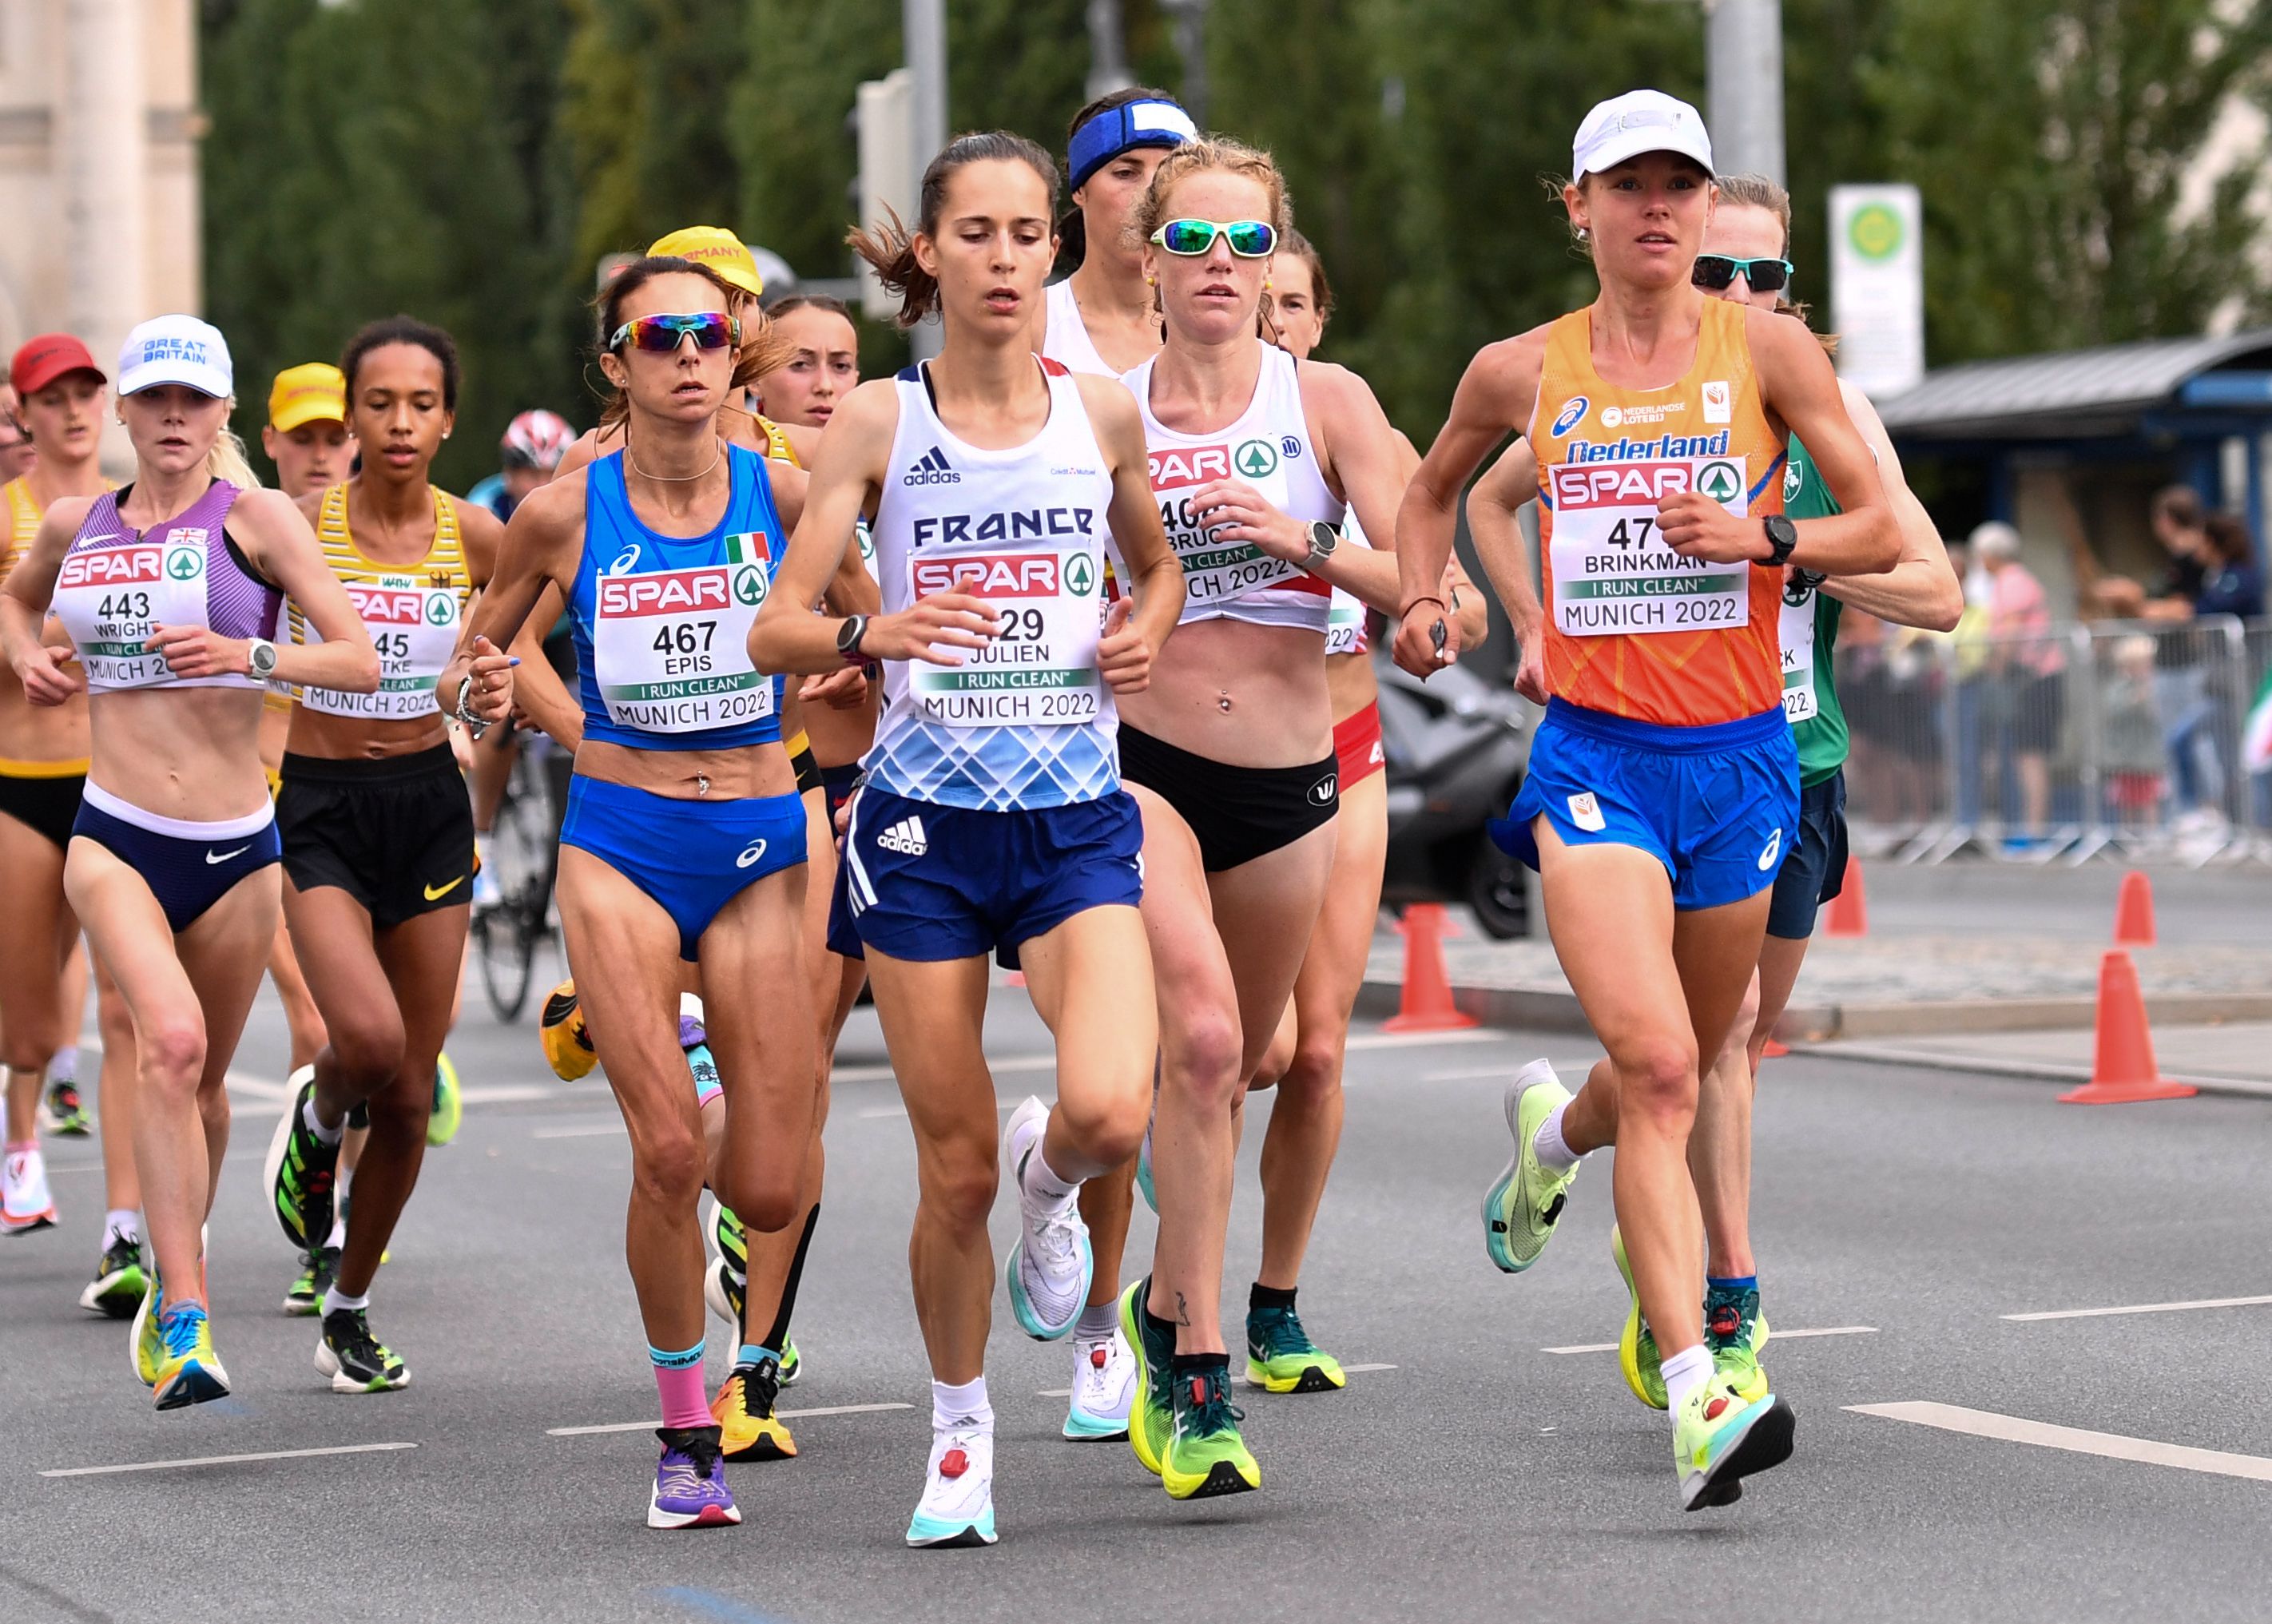 Nienke Brinkman in action at the European Championships